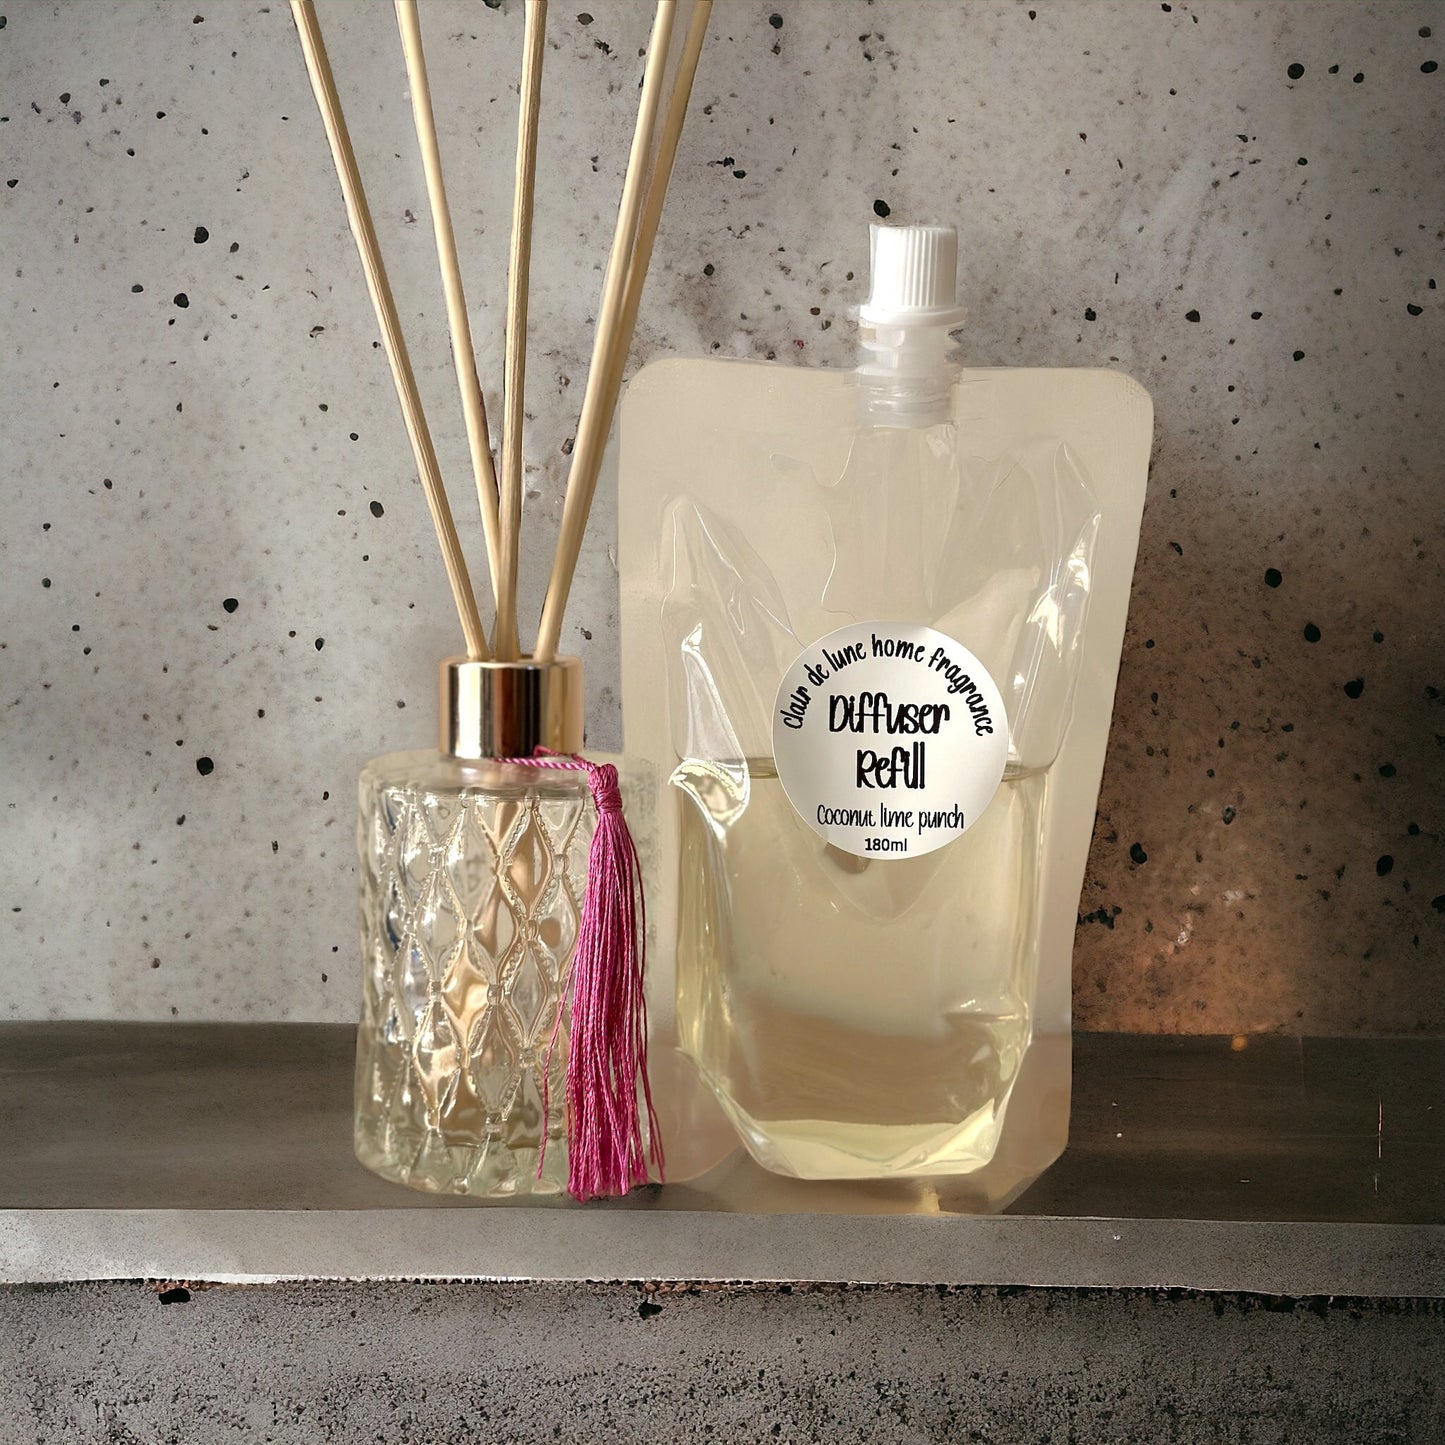 Berry delight - Diffusers